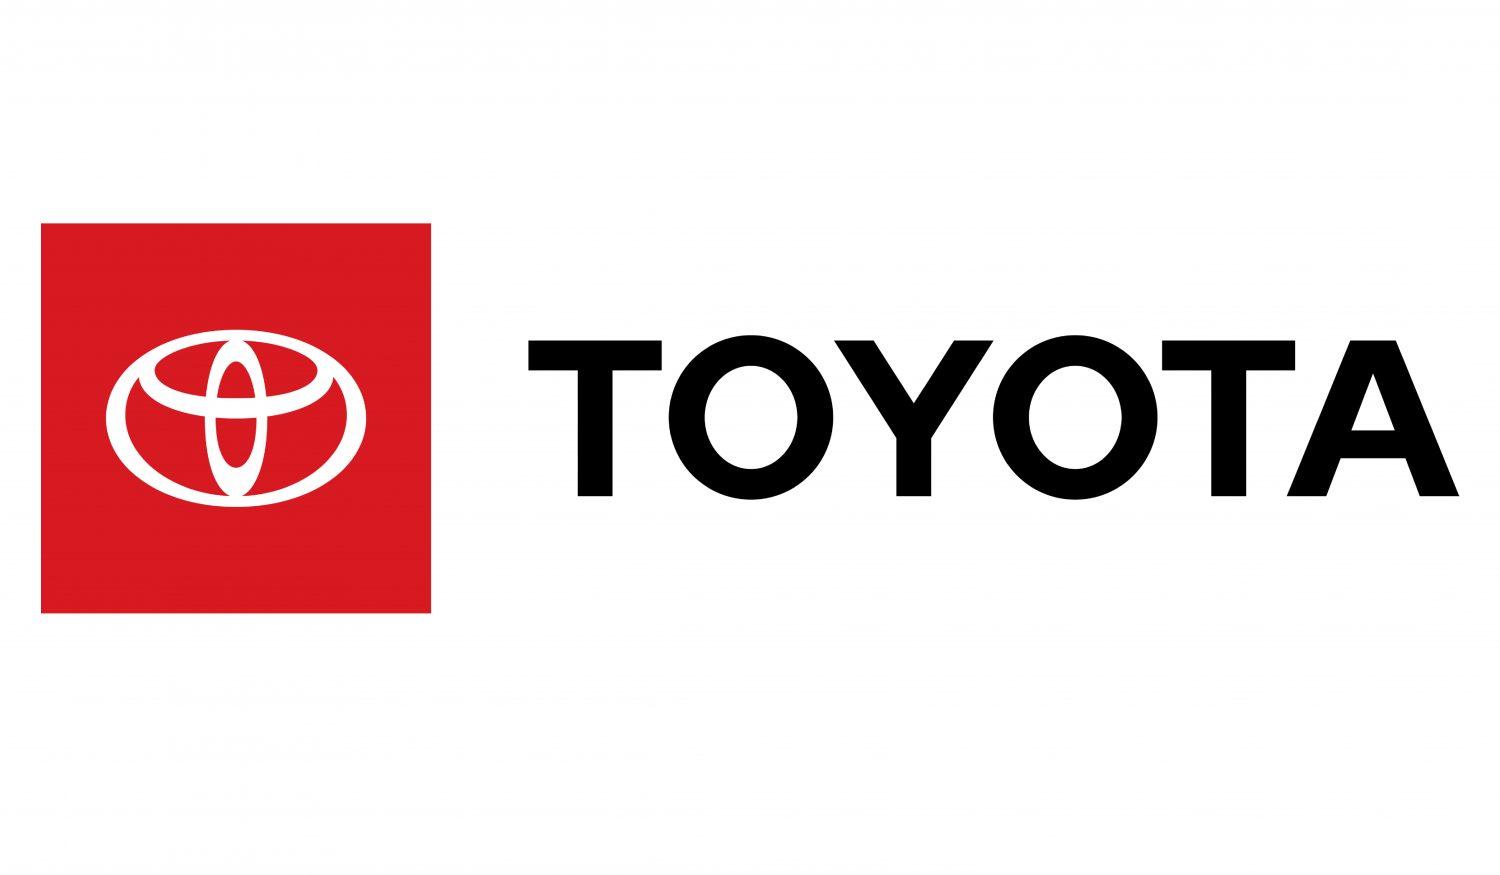 Toyota has surpassed GM in sales even as they reduced car-buying incentives.